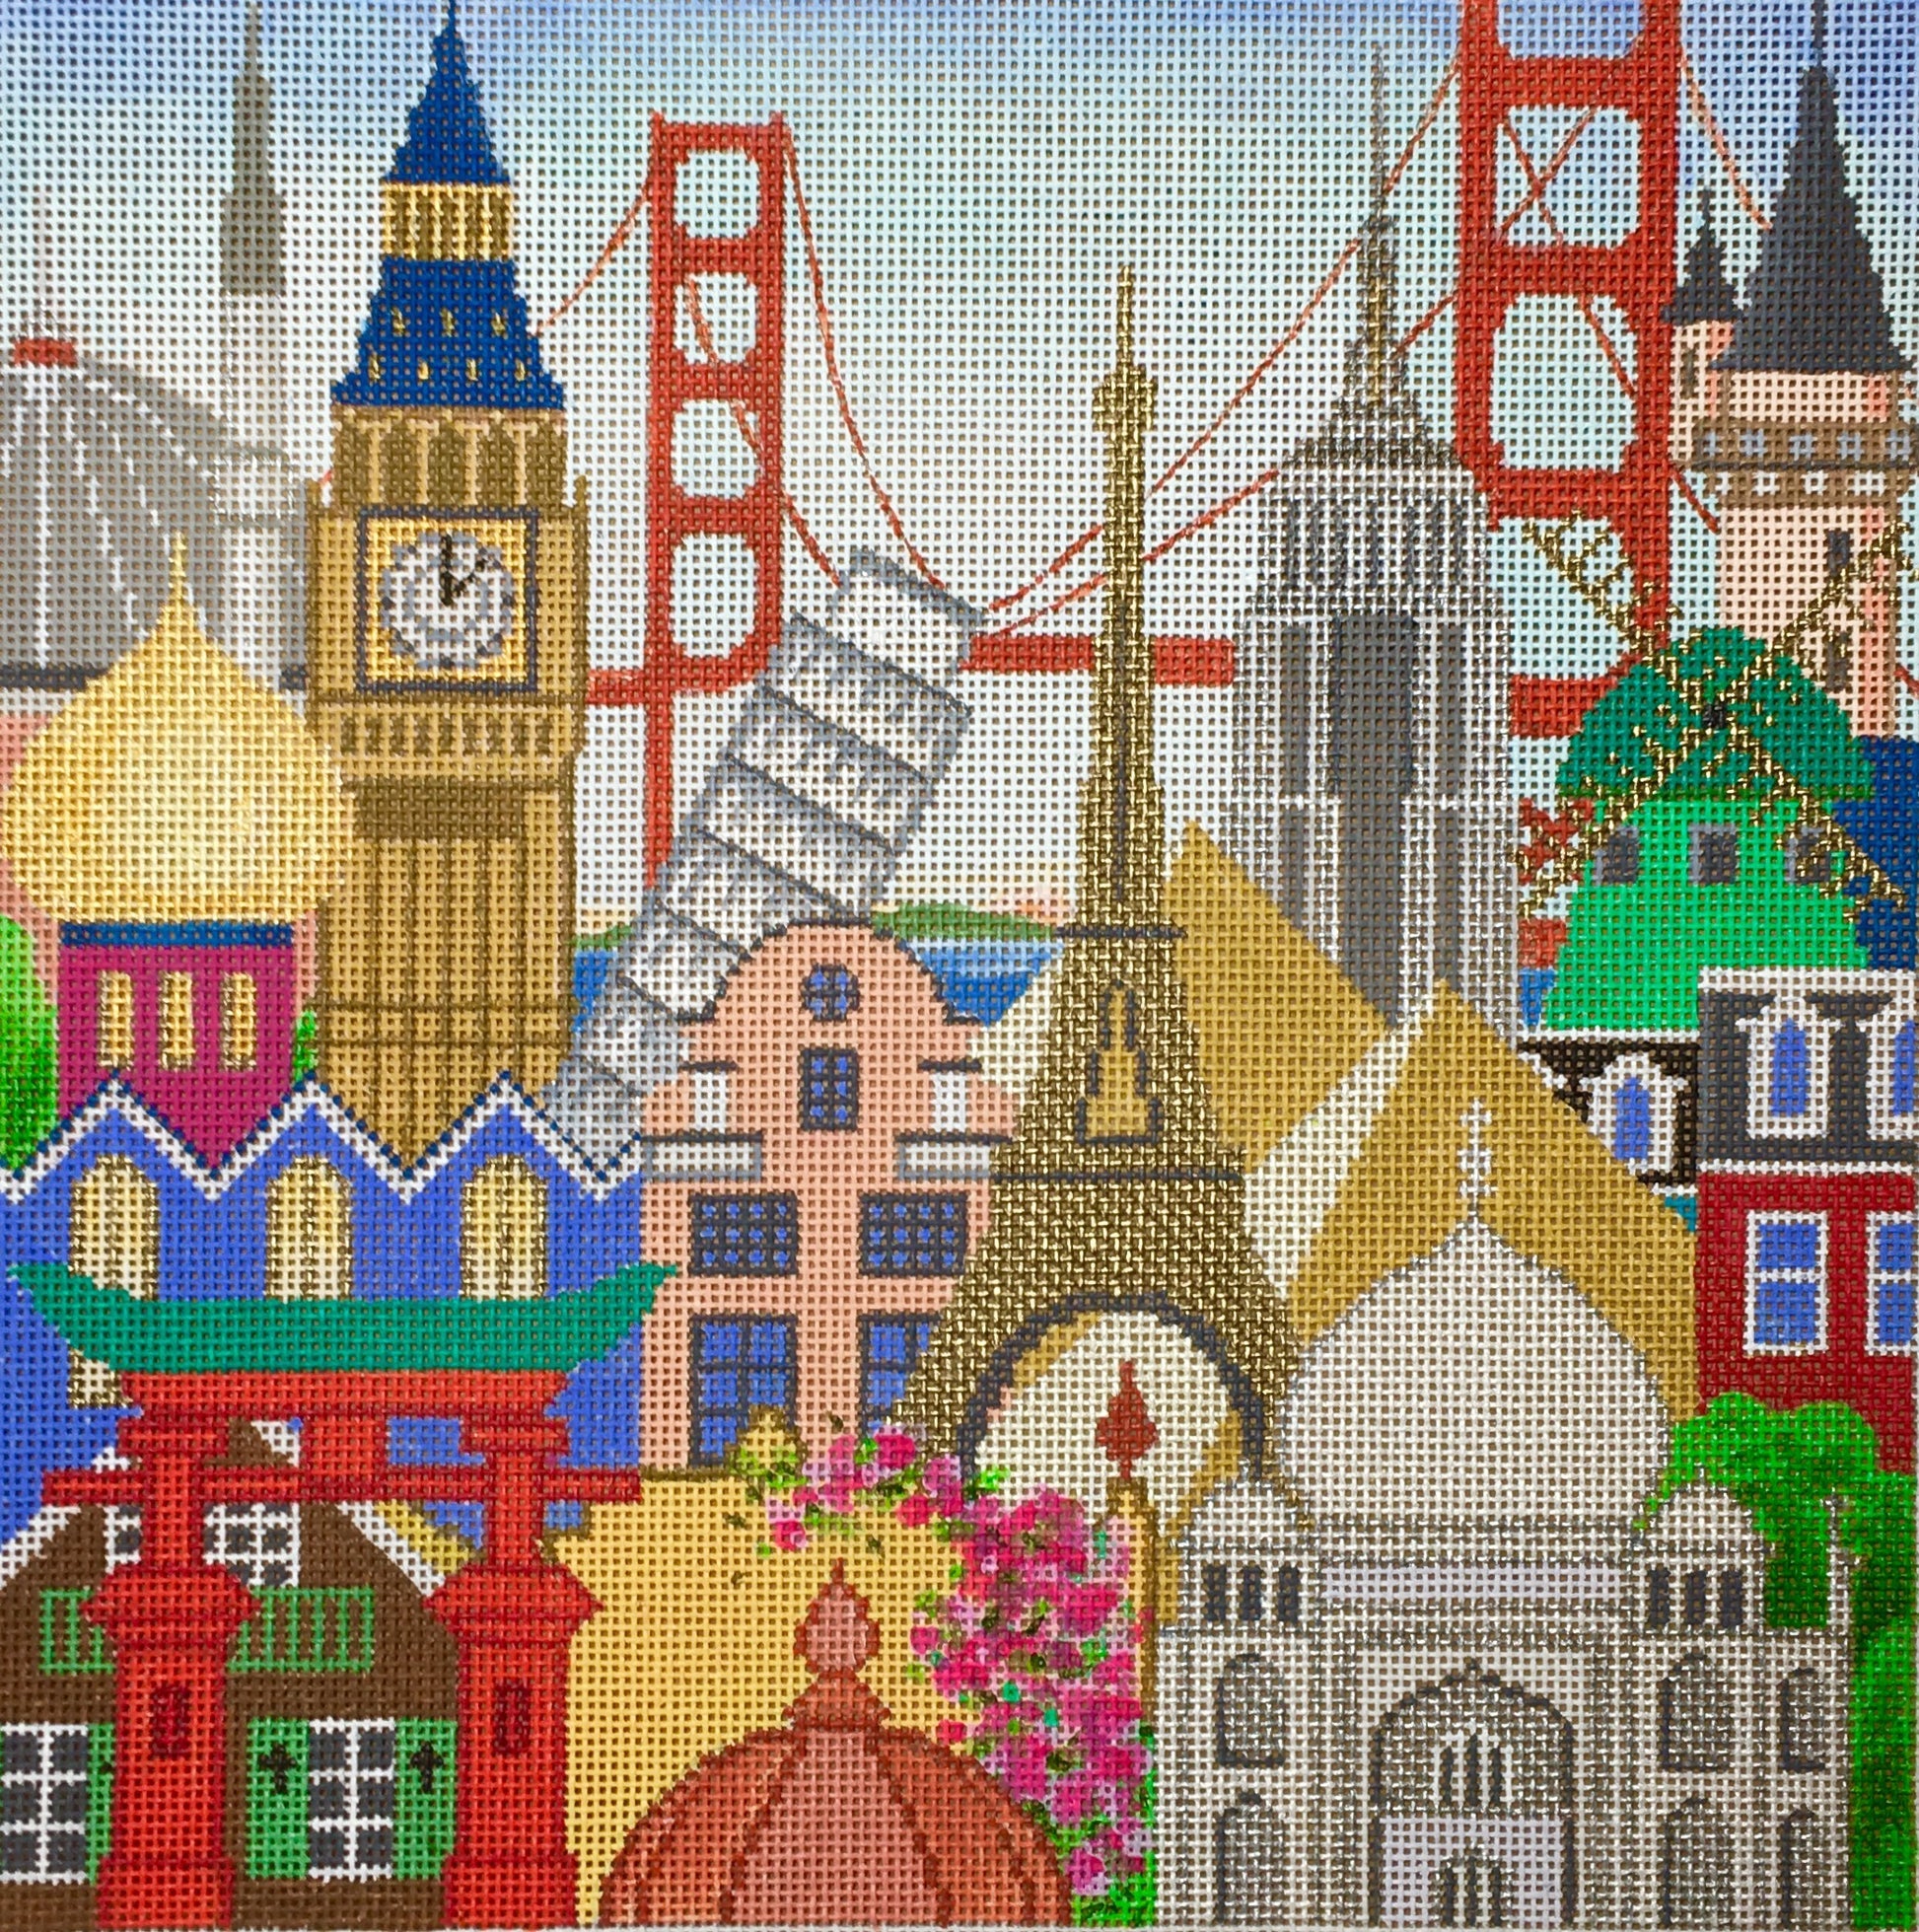 Amanda Lawford bright needlepoint canvas of famous world monuments in the same place (Big Ben, the leaning tower of Pisa, the Eiffel Tower, etc)